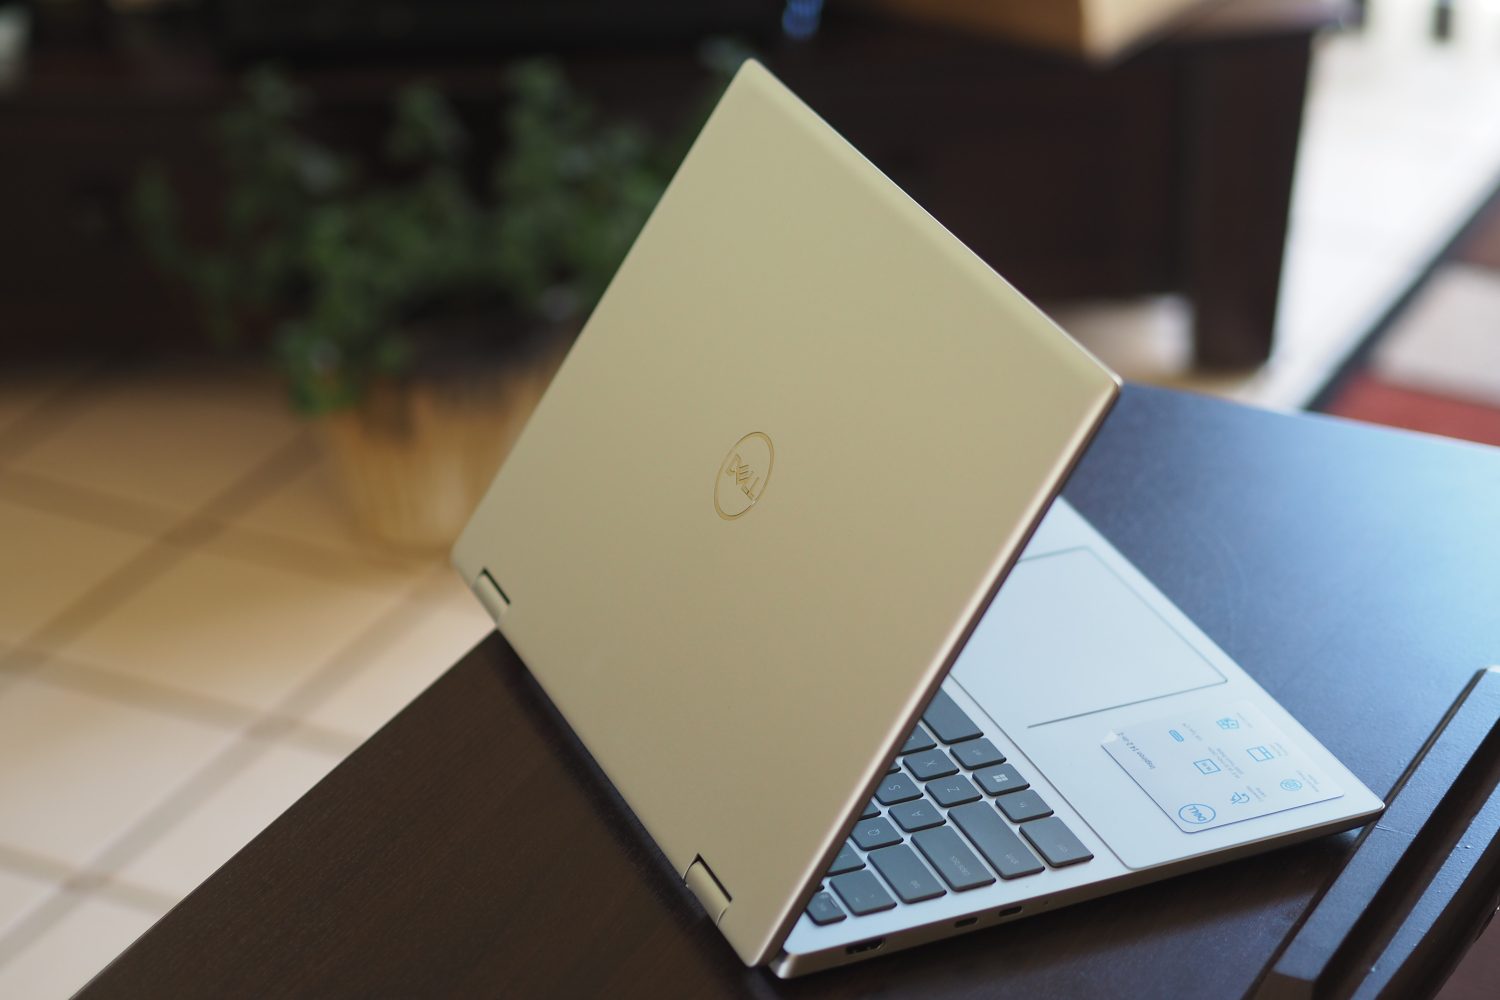 Dell Inspiron 14 2-in-1 review: Disappointing overall | Digital Trends